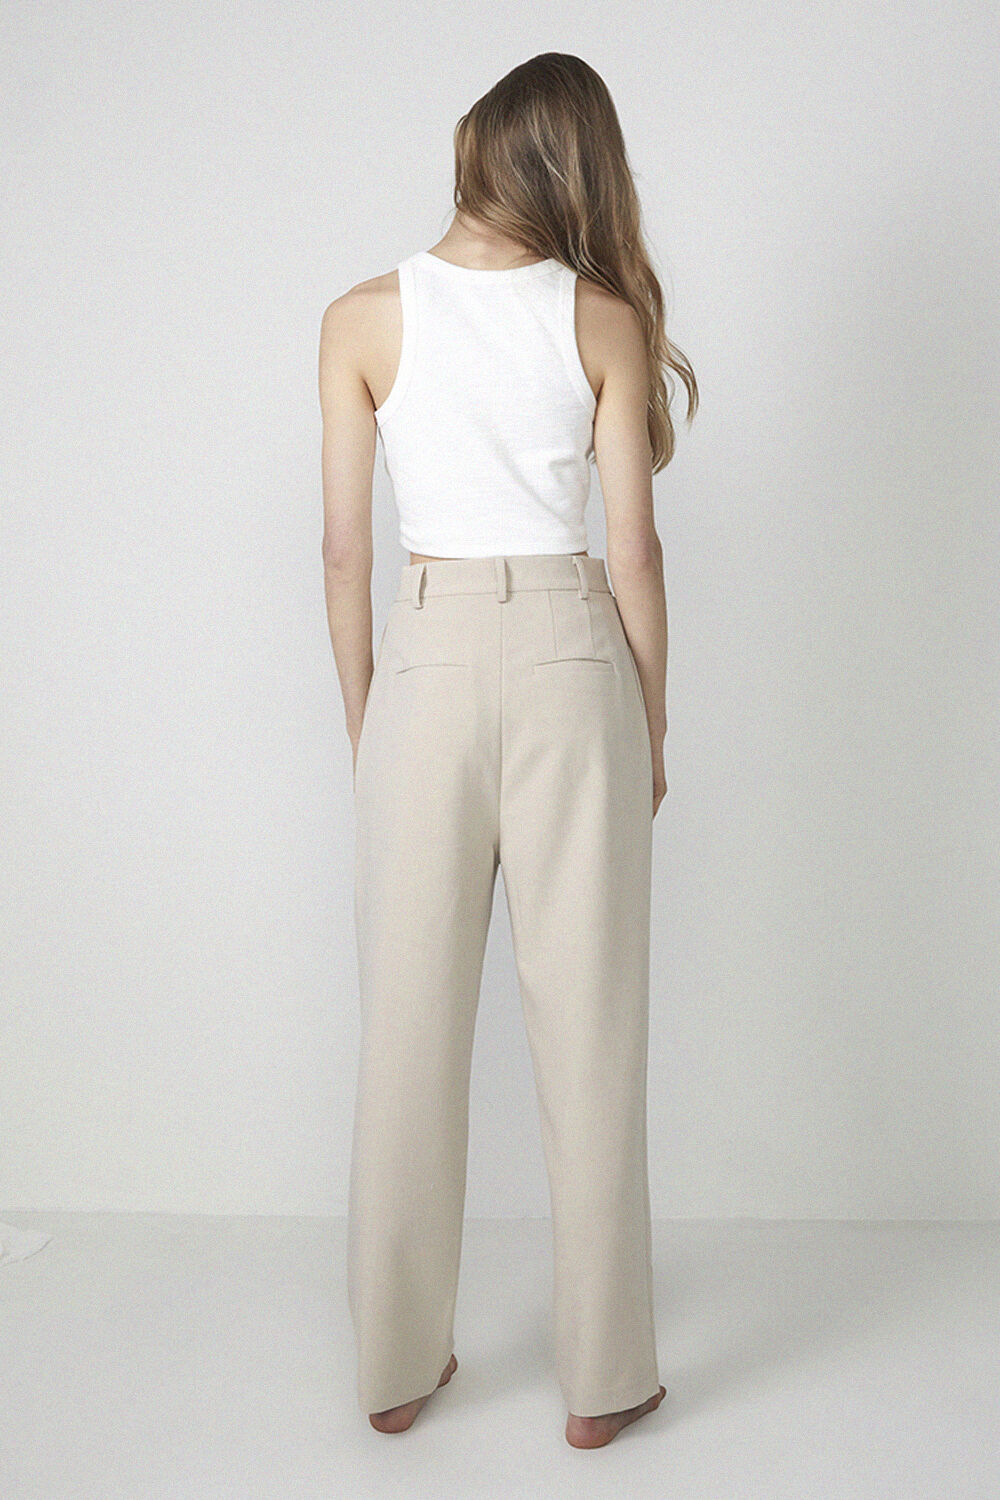 TUCK FRONT TROUSER in colour MOONLIGHT